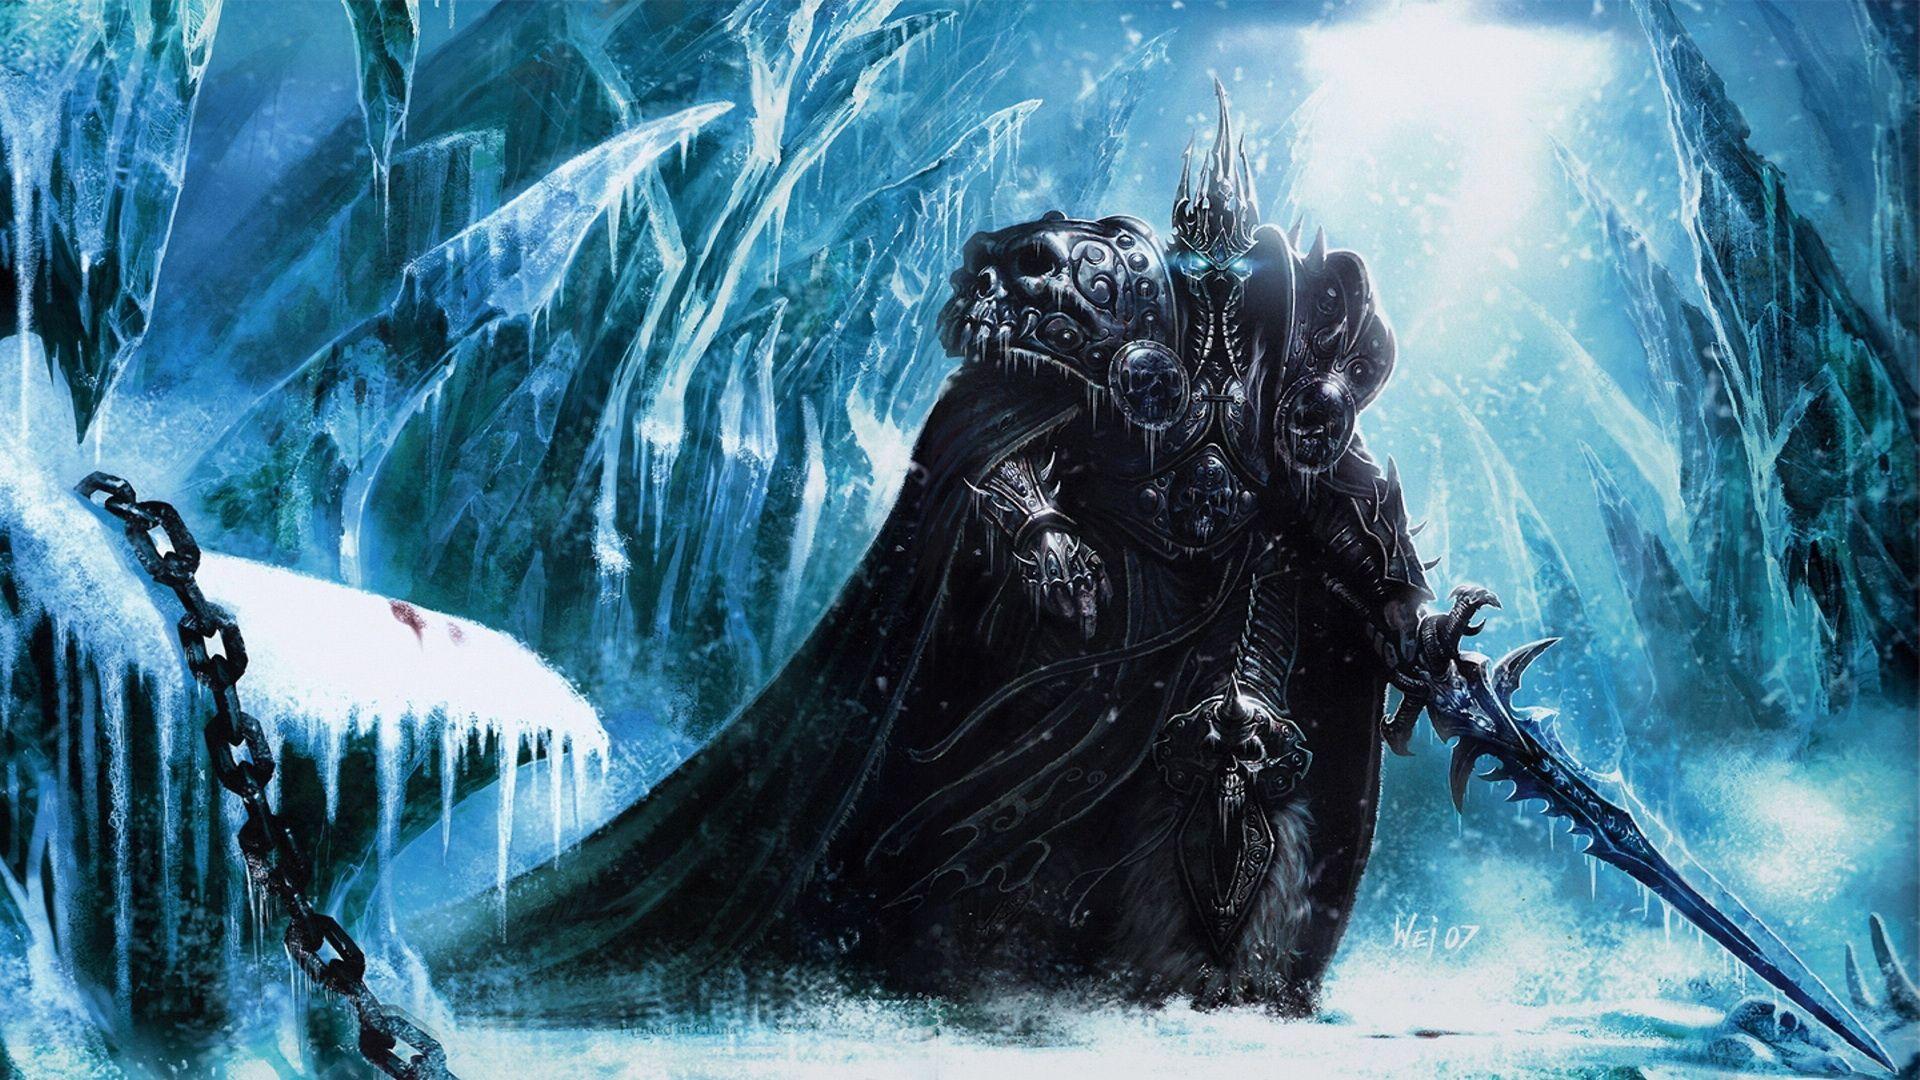 The Lich King Wallpaper Group (79)